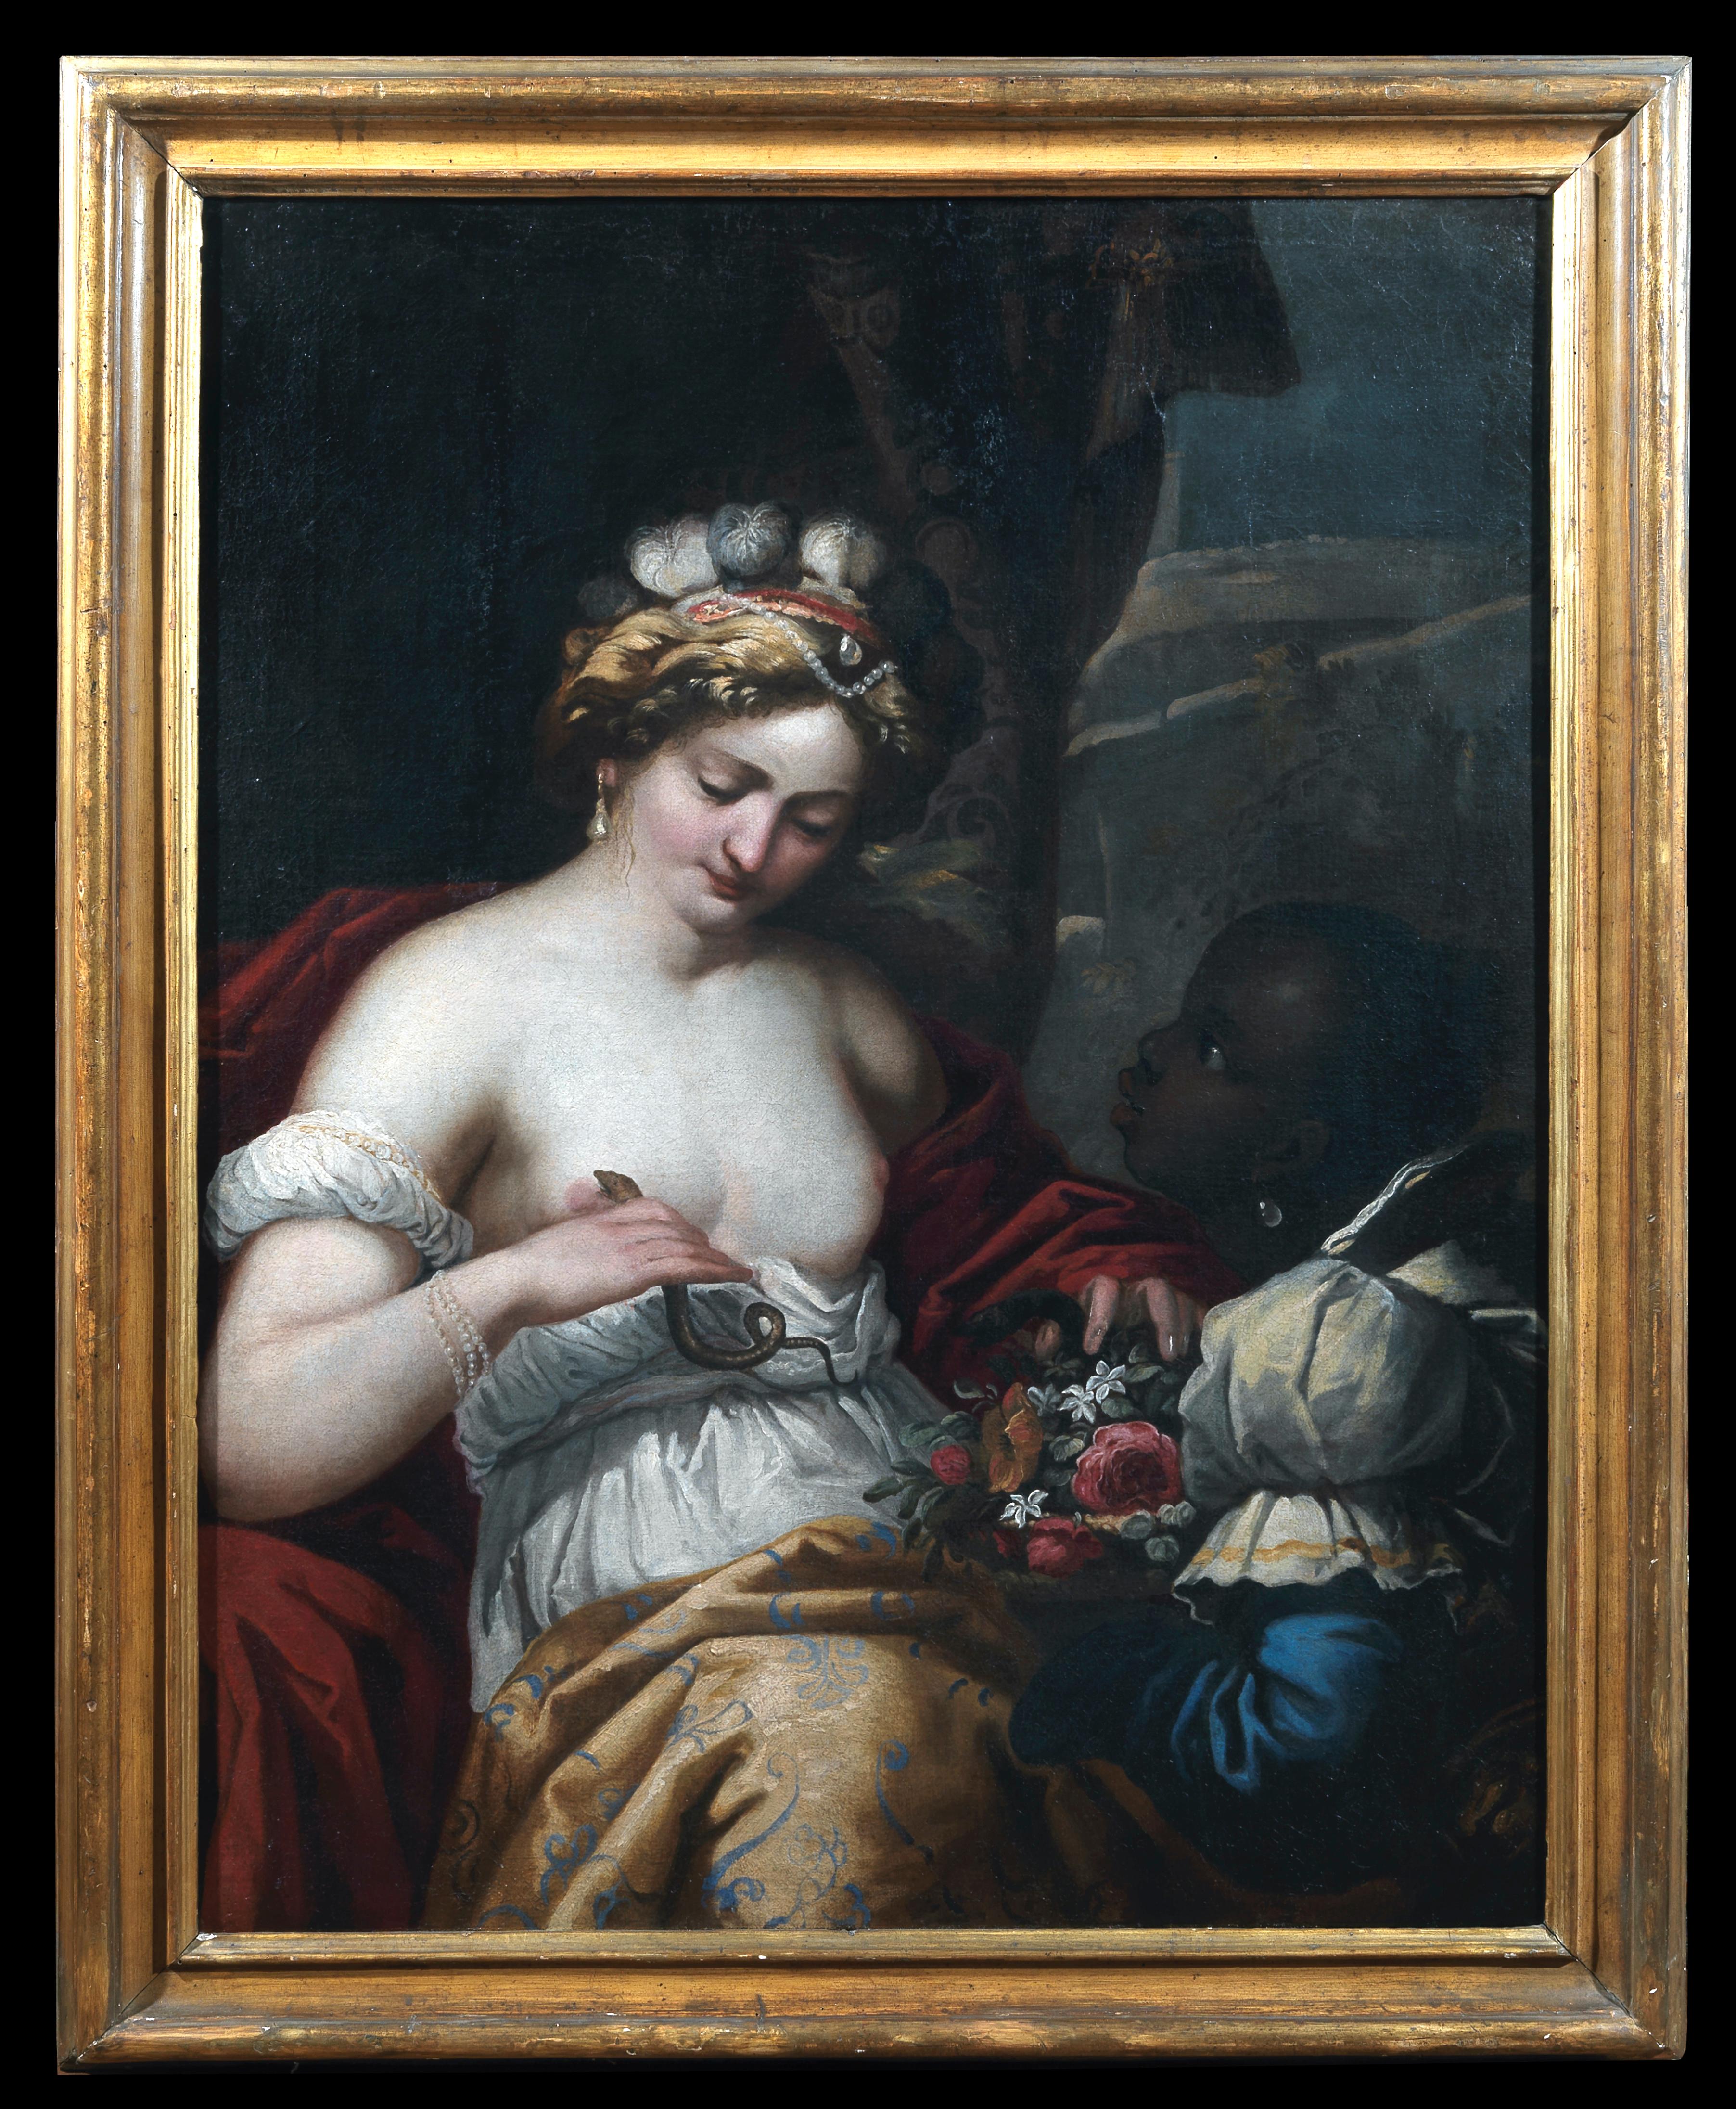 Cleopatra Queen of Egypt 17' century Painting Oil on Canvas - Black Figurative Painting by Diamantini Giuseppe